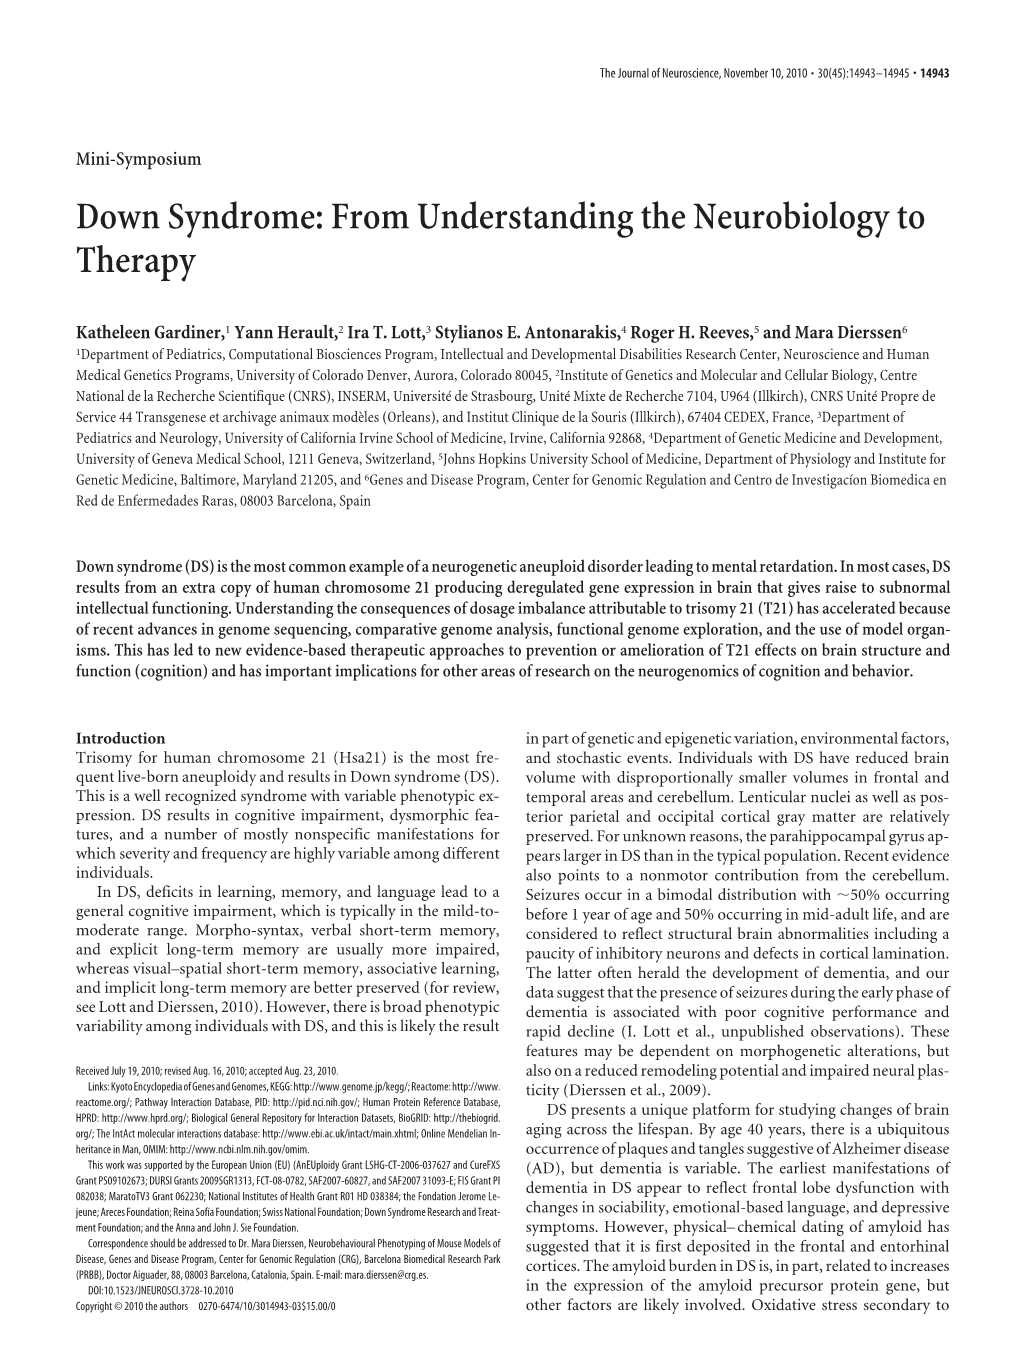 Down Syndrome: from Understanding the Neurobiology to Therapy